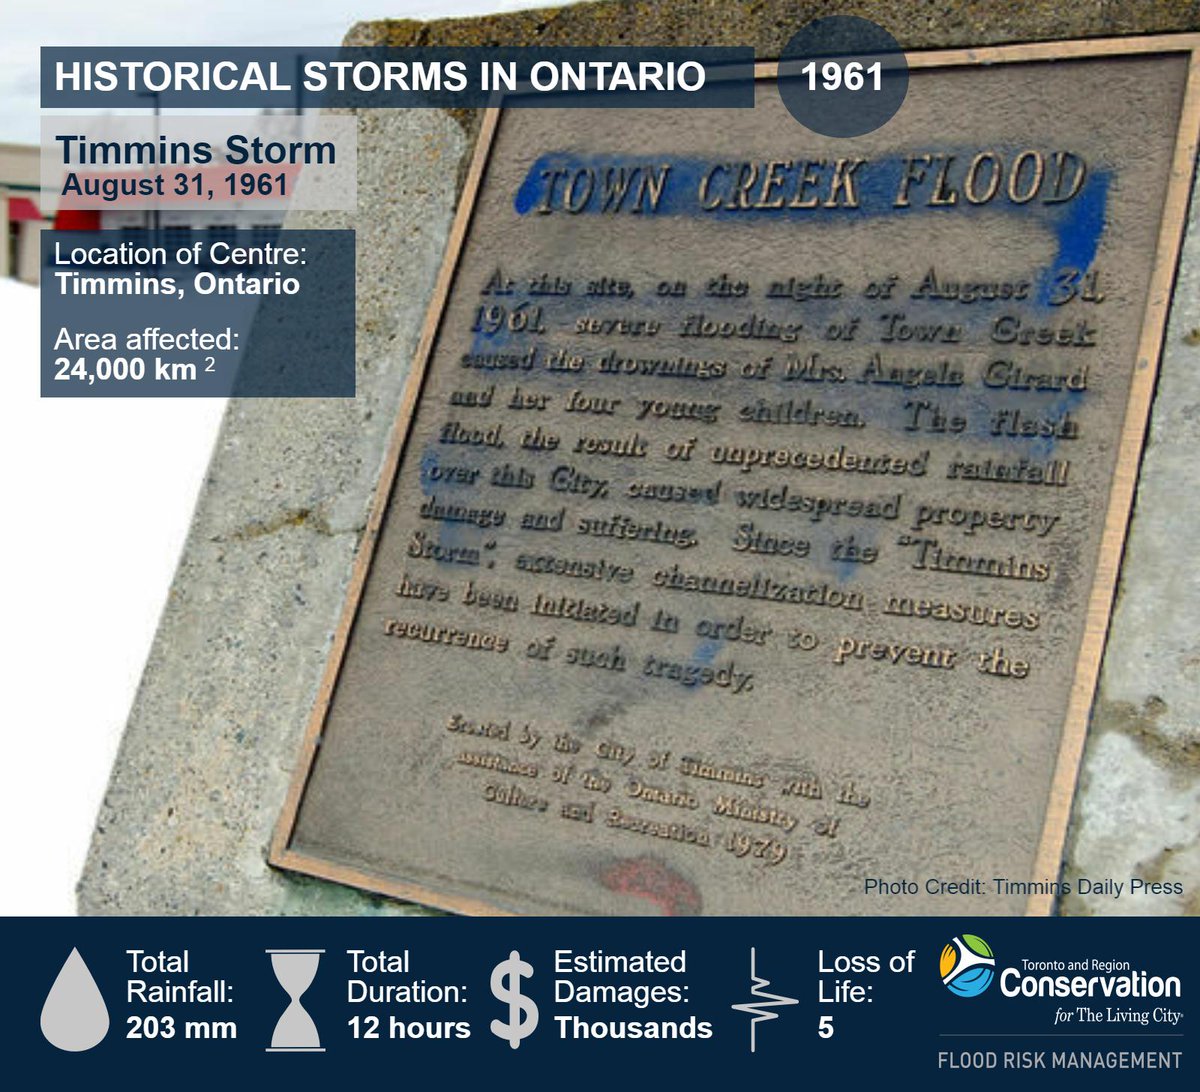 #Timminsstorm Aug 1961 #Historicalstorms #FloodFacts #WaterSafety #TRCAflood ow.ly/hqMQ30cQipr